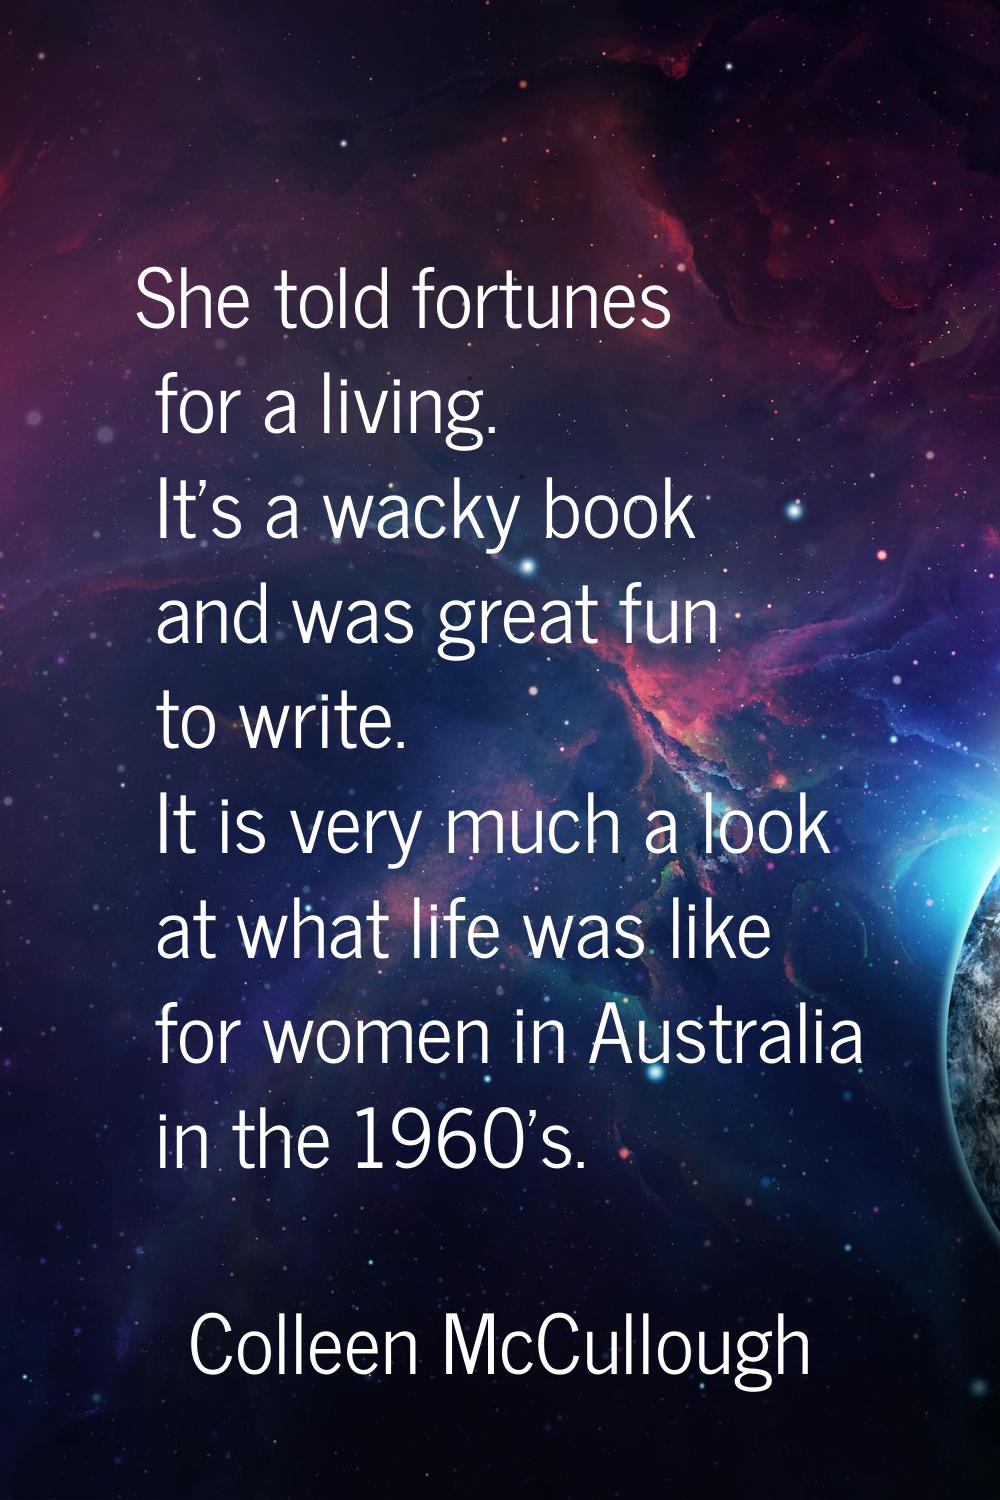 She told fortunes for a living. It's a wacky book and was great fun to write. It is very much a loo